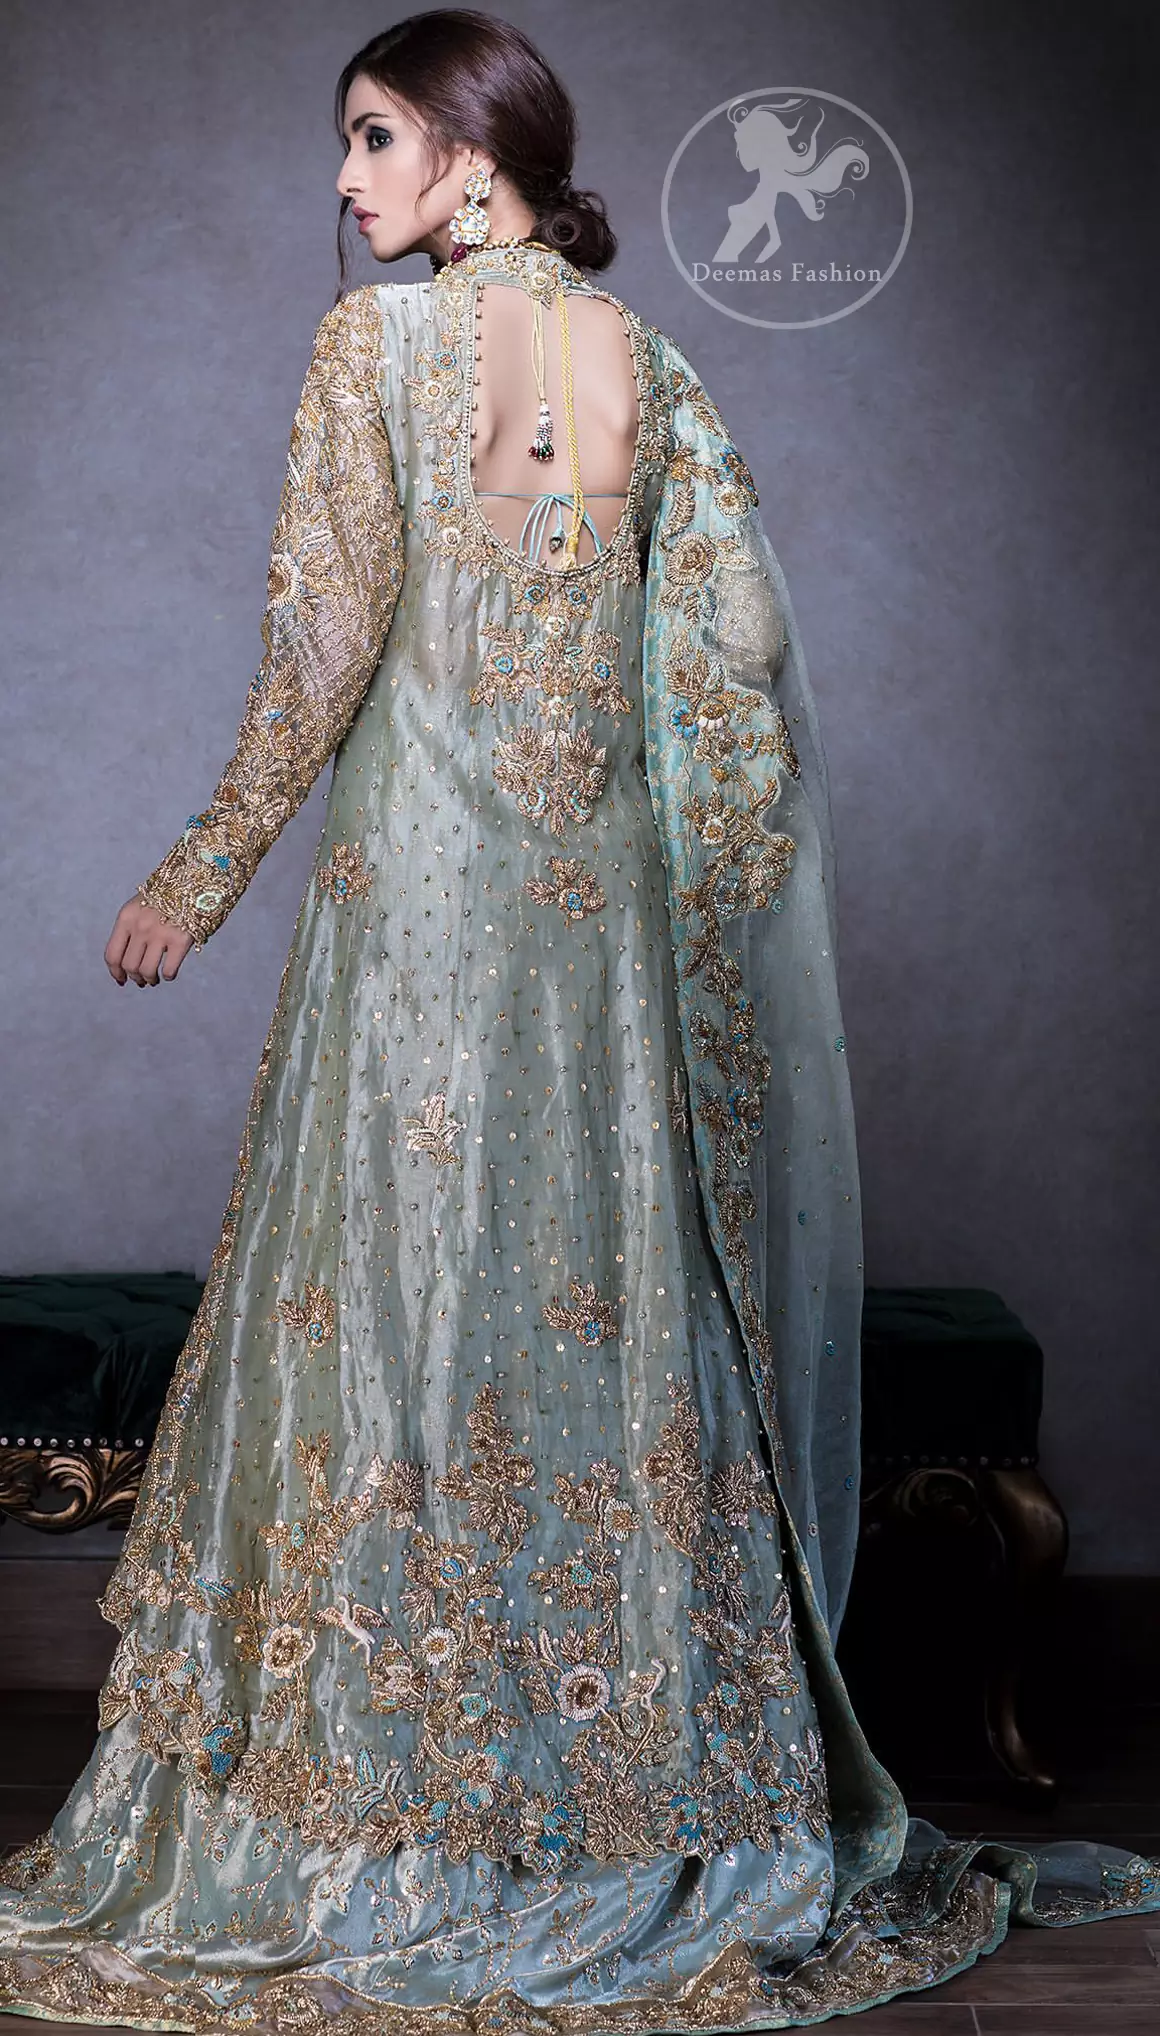 This regal regent gray outfit is an immensely captivating traditional piece, enhancing the art of classical heritage showcasing the craftsmanship of kora, dabka & mukesh detailed with pearls; artistically embellished to give a beautiful rhythm to the outfit. Gown is heavily embellished with antique zardosi work and floral thread embroidery. It comes with embellished lehenga enhanced with embroidered applique on the bottom. It comes with organza dupatta with embellished scalloped border at all ends.